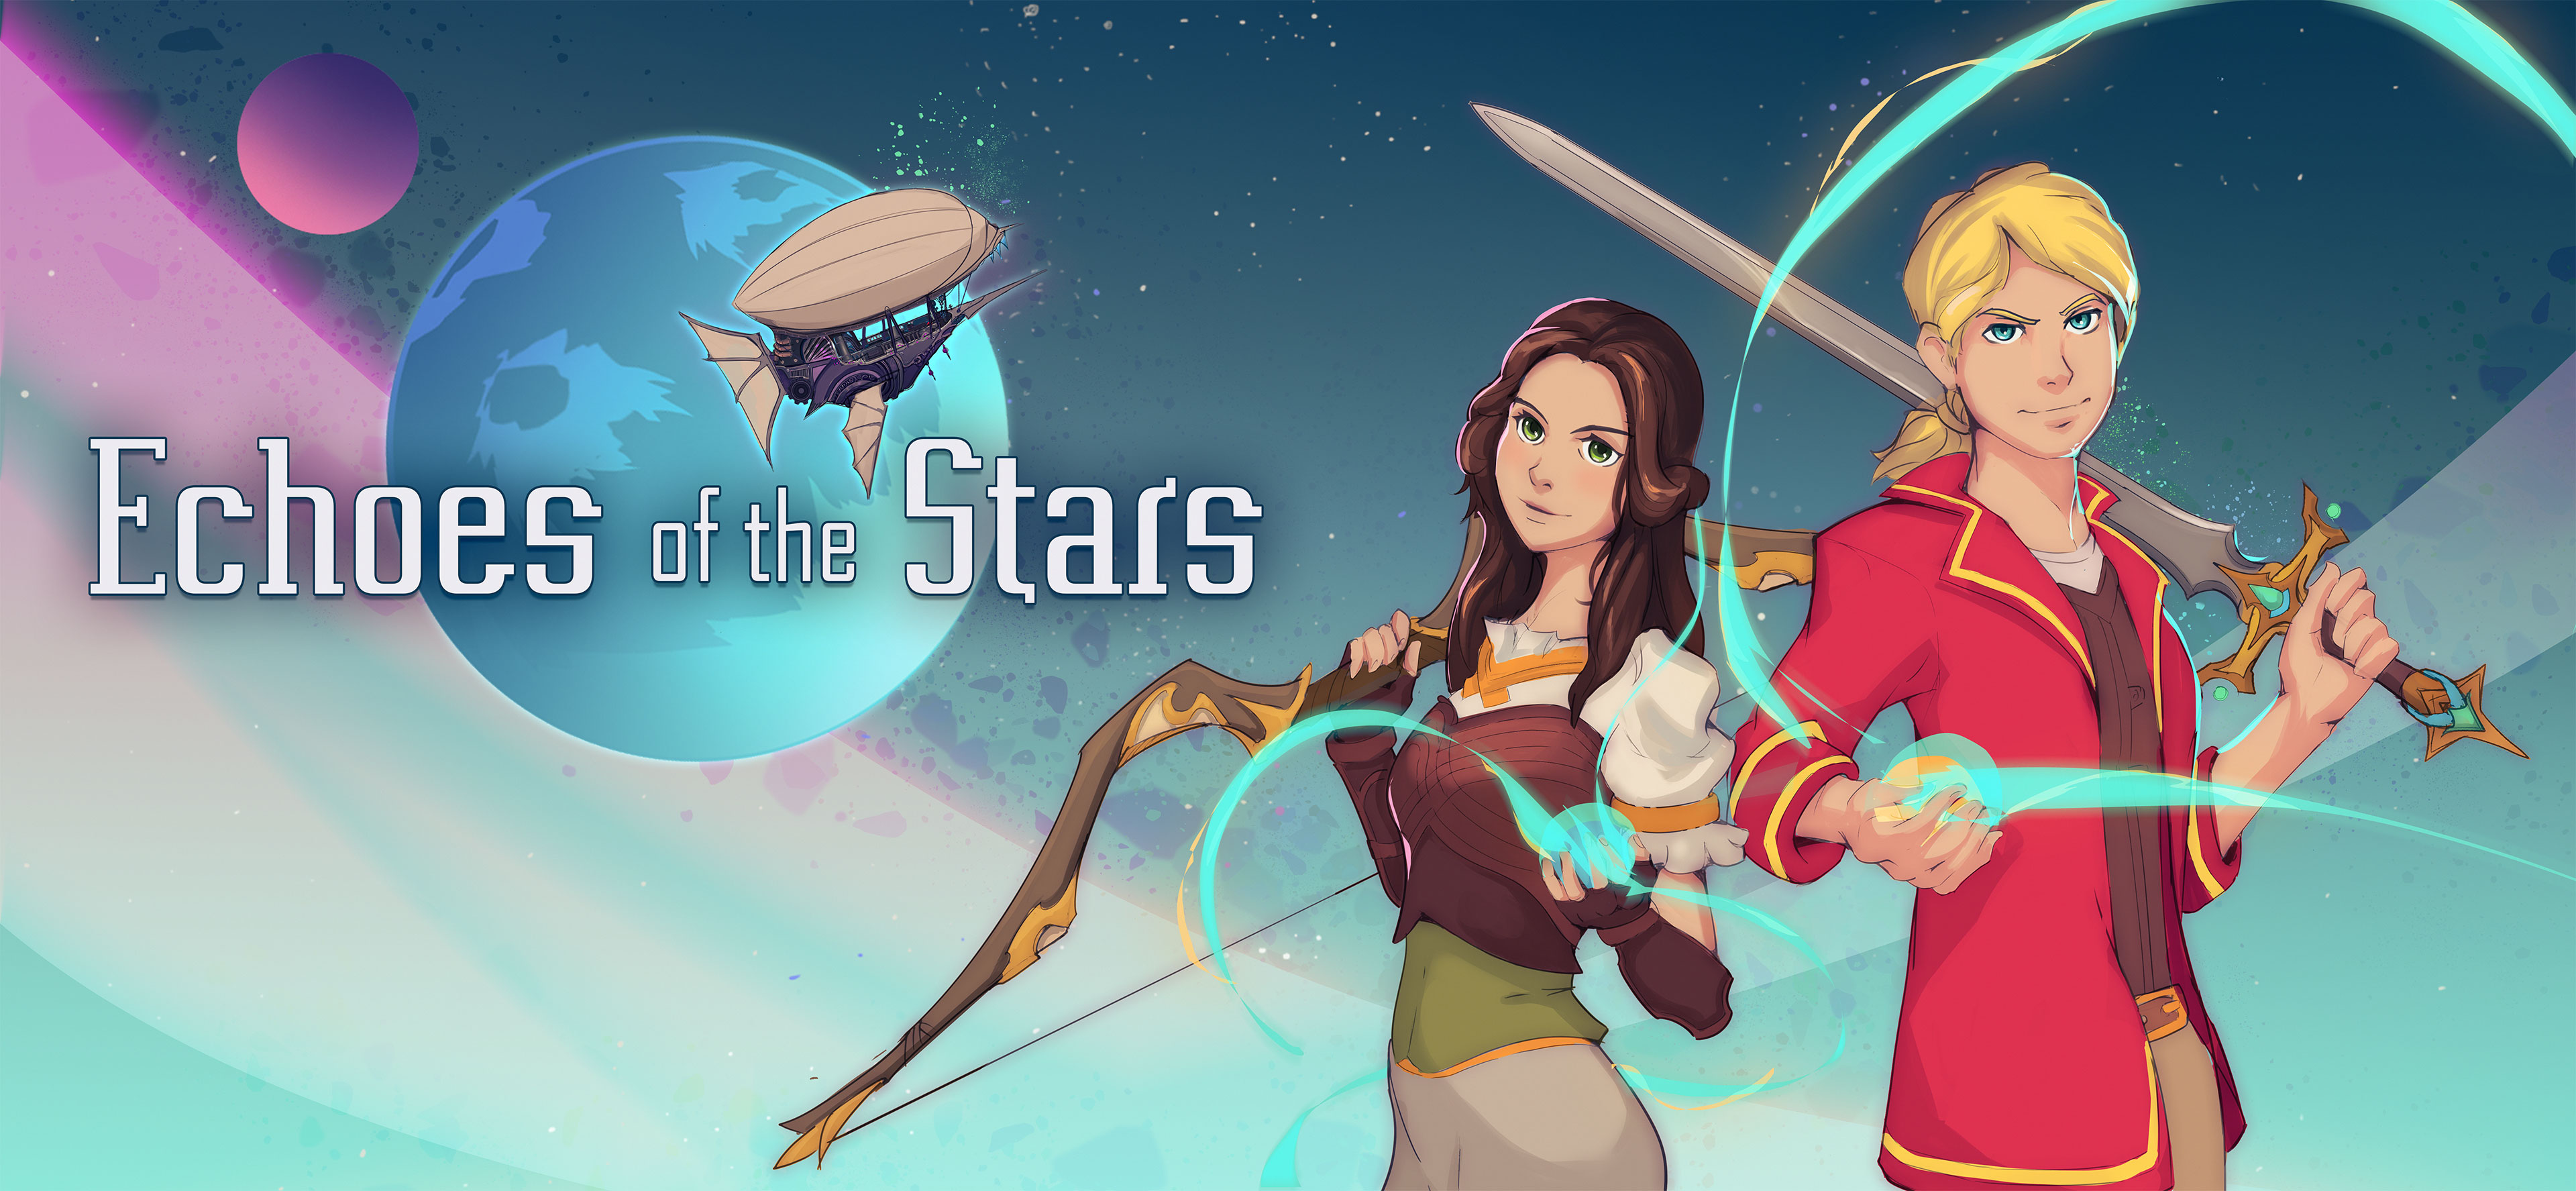 Echoes of the Stars: RPG Demo